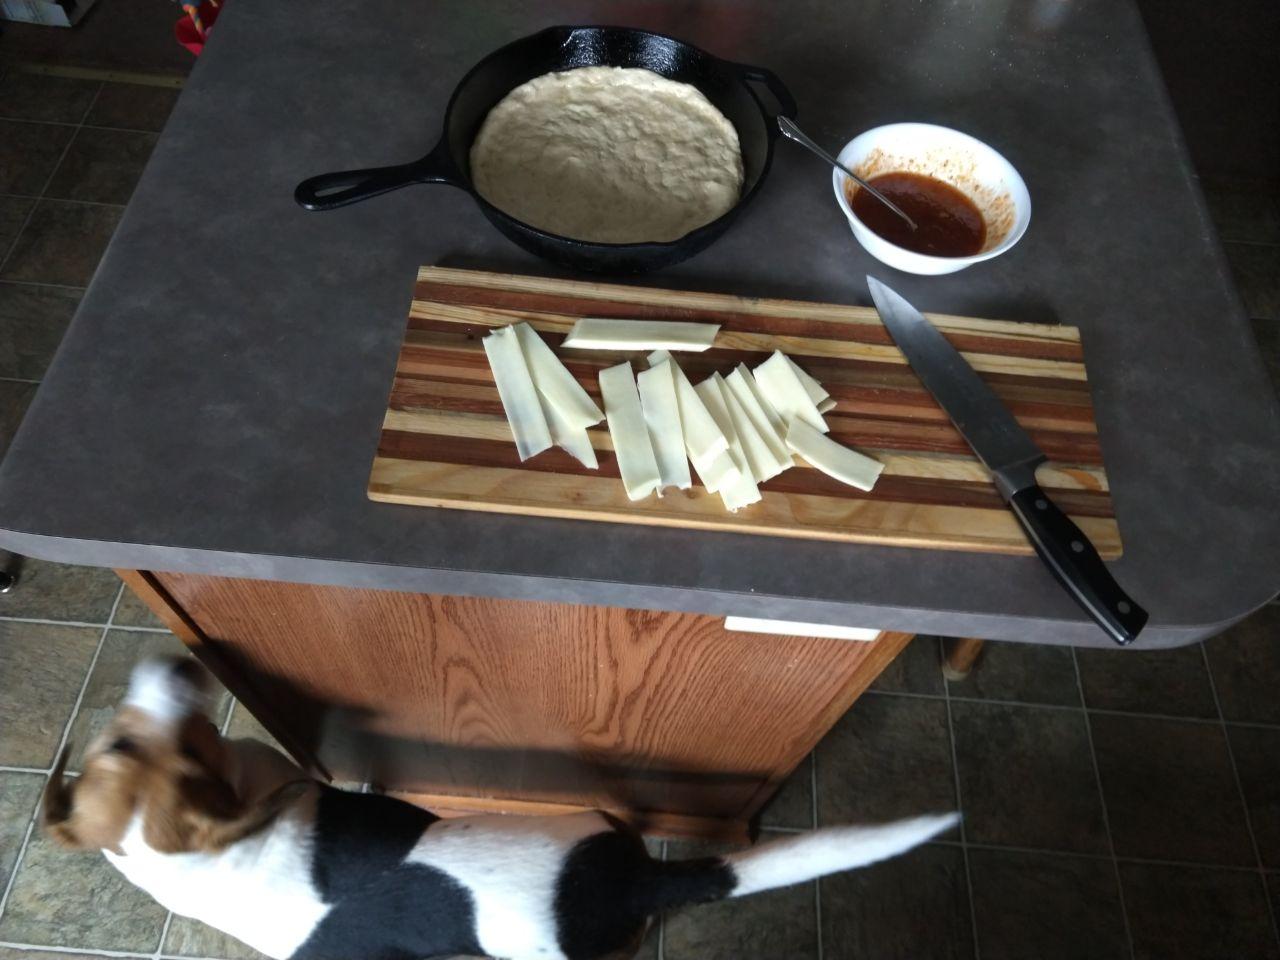 Cutting cheese to place on the pizza, with the mixed sauce and dough rising in the pan.